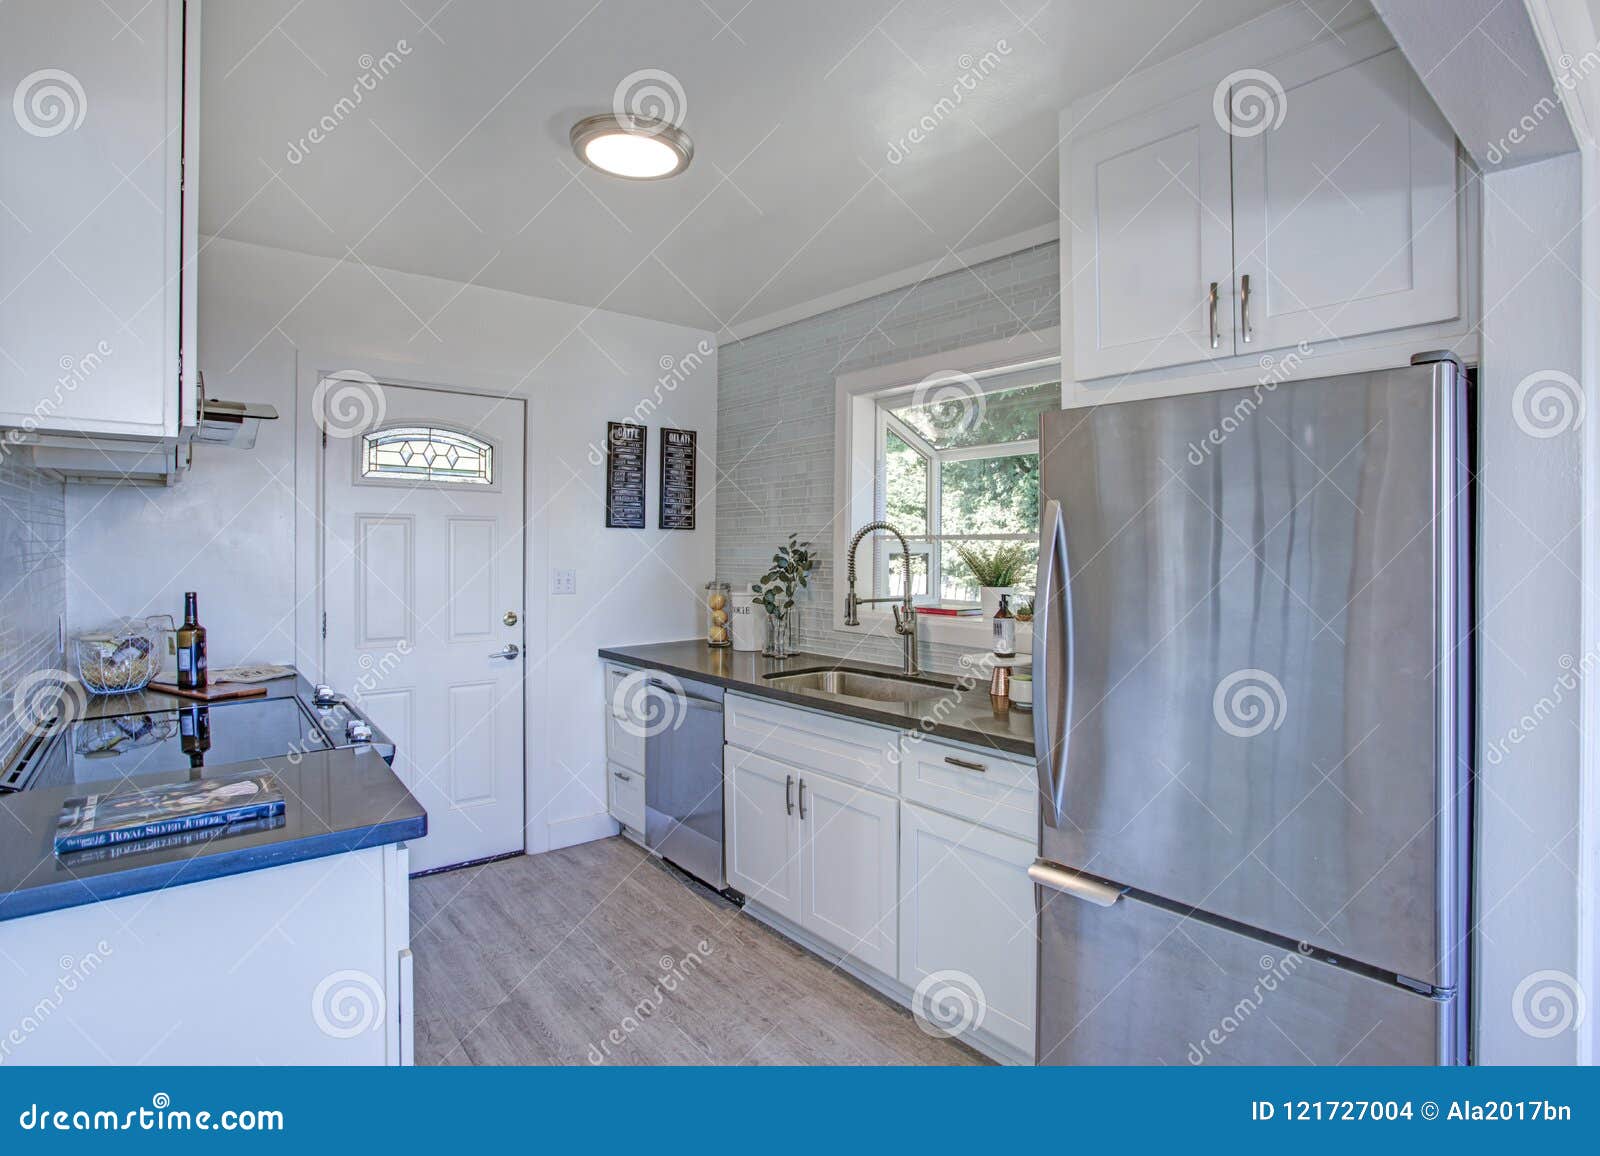 Cozy And Small Kitchen With White Cabinets Stock Photo Image Of